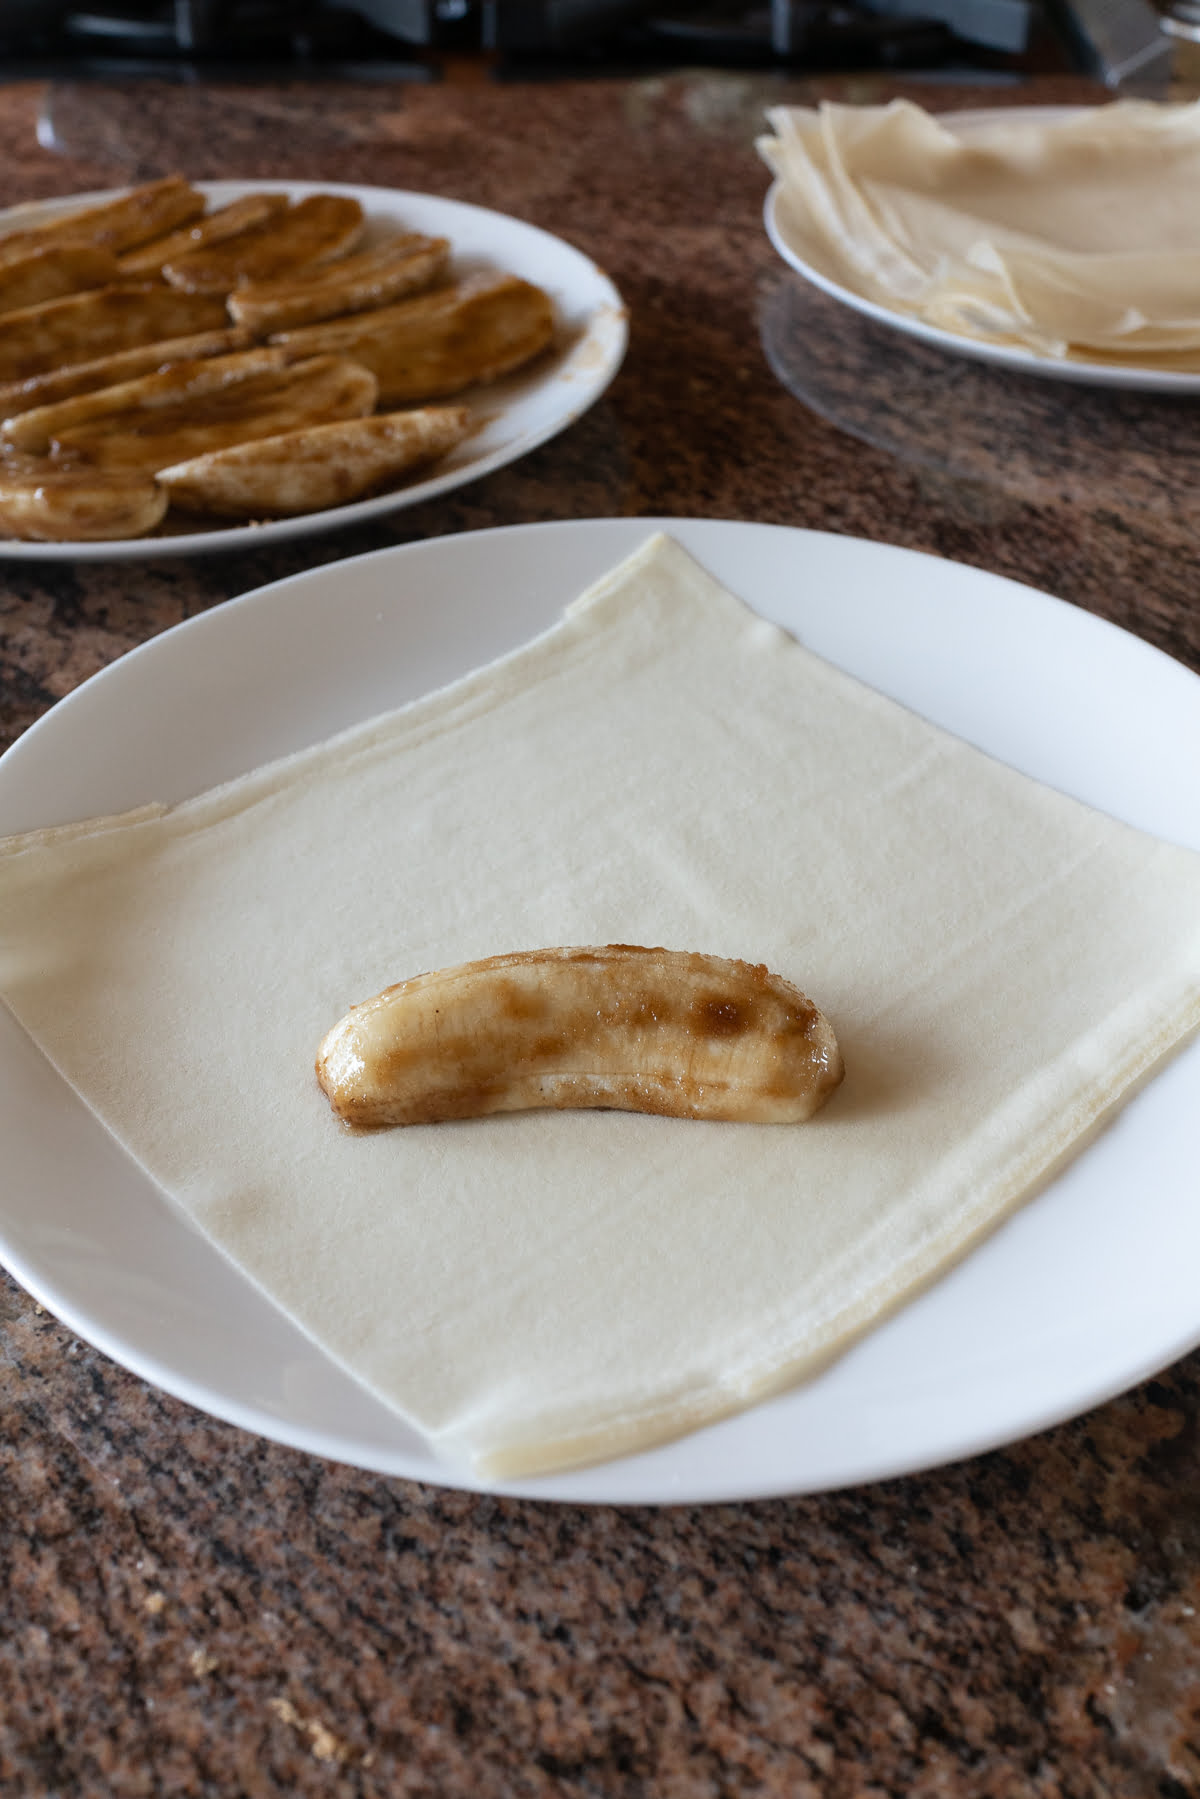 Apple banana half rolled in brown sugar and placed on top of a lumpia wrapper.